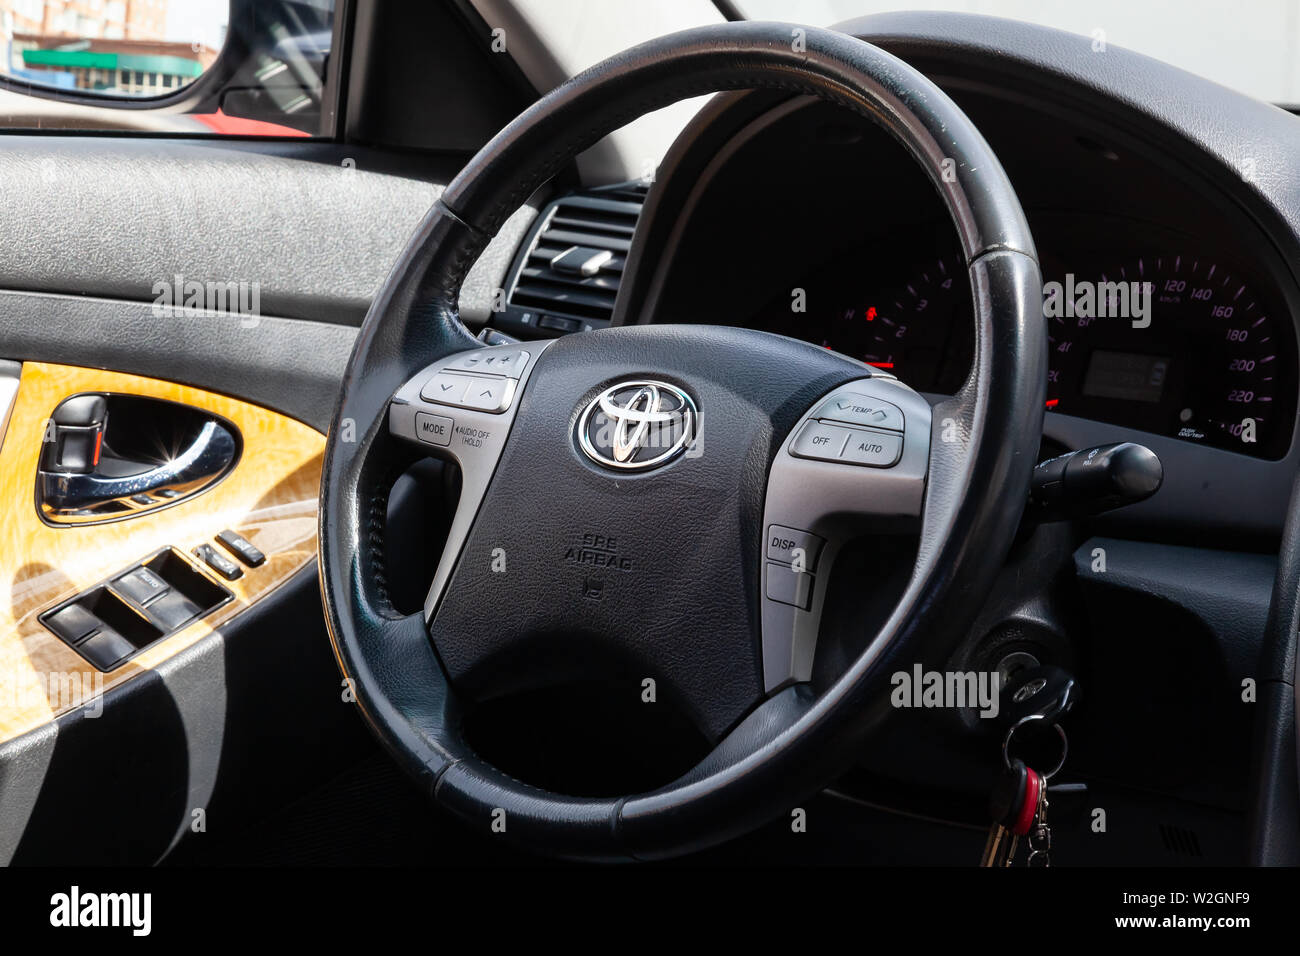 Novosibirsk, Russia - 07.09.2019: View to the interior of Toyota Camry 2006 with dashboard, clock, media system, front seats, gray leather and shiftge Stock Photo